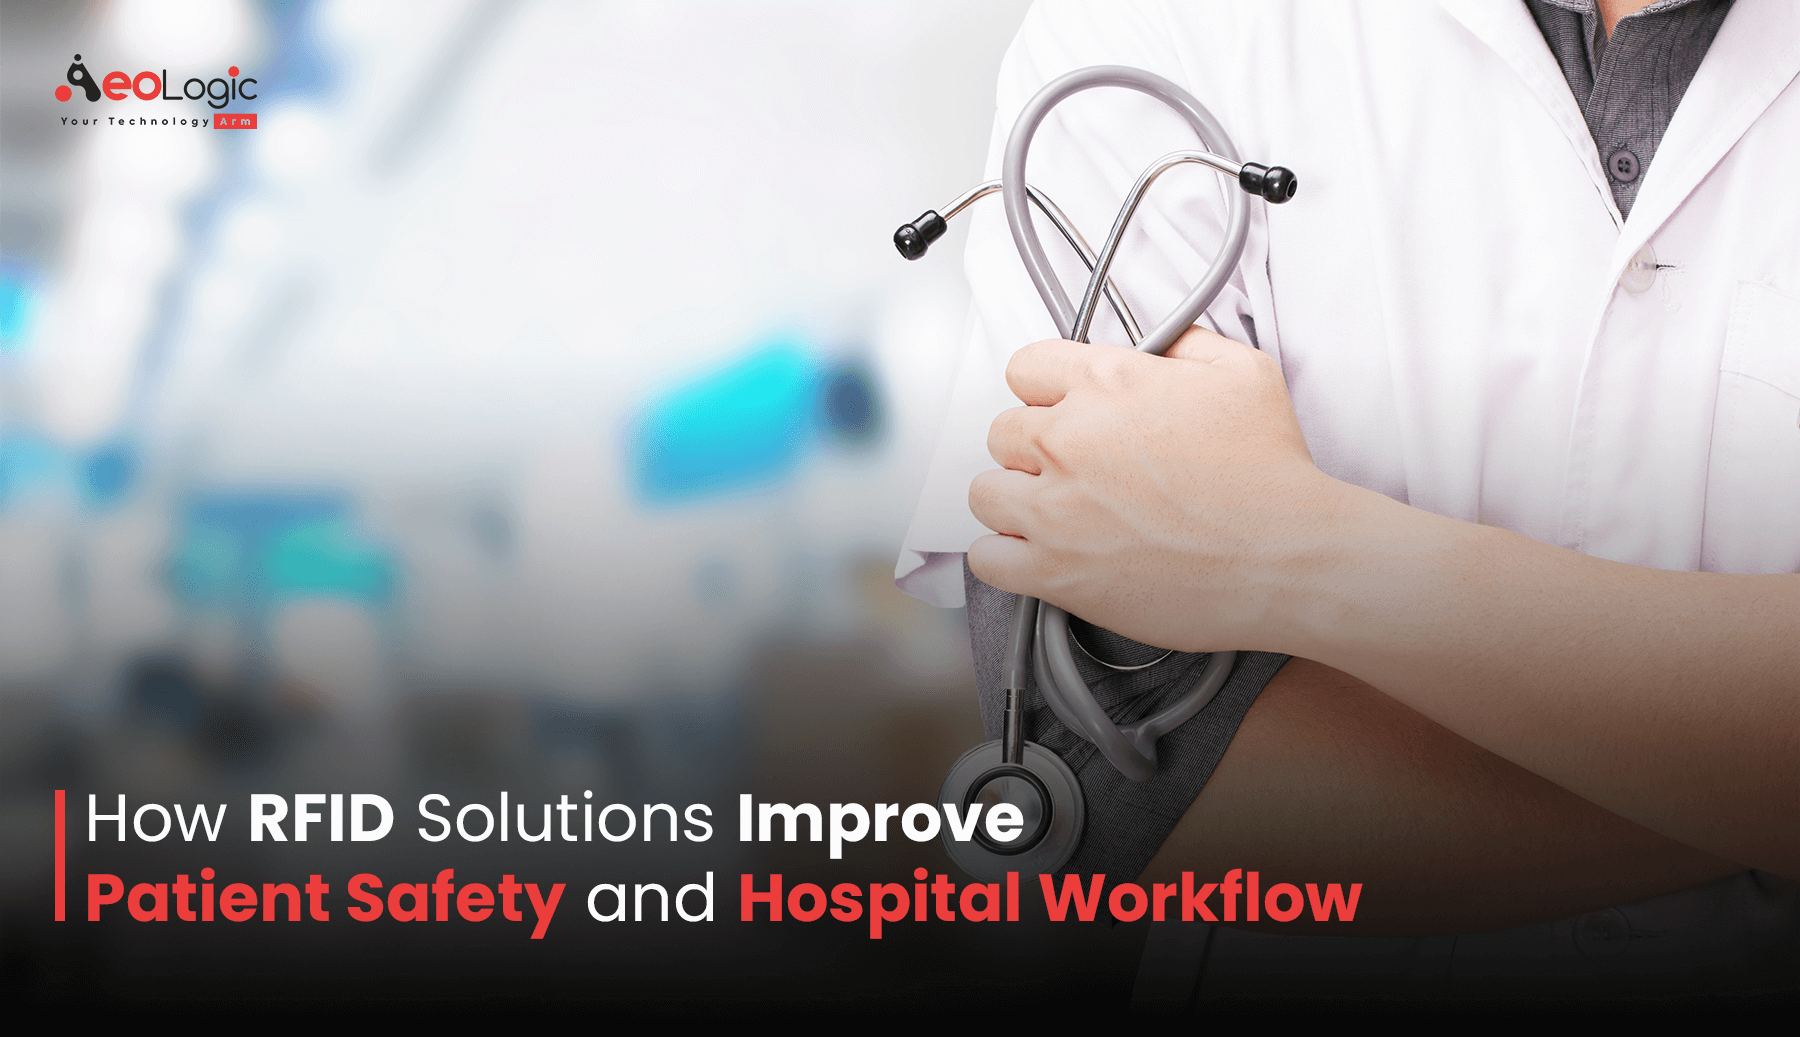 How RFID Solutions Improve Patient Safety and Hospital Workflow?